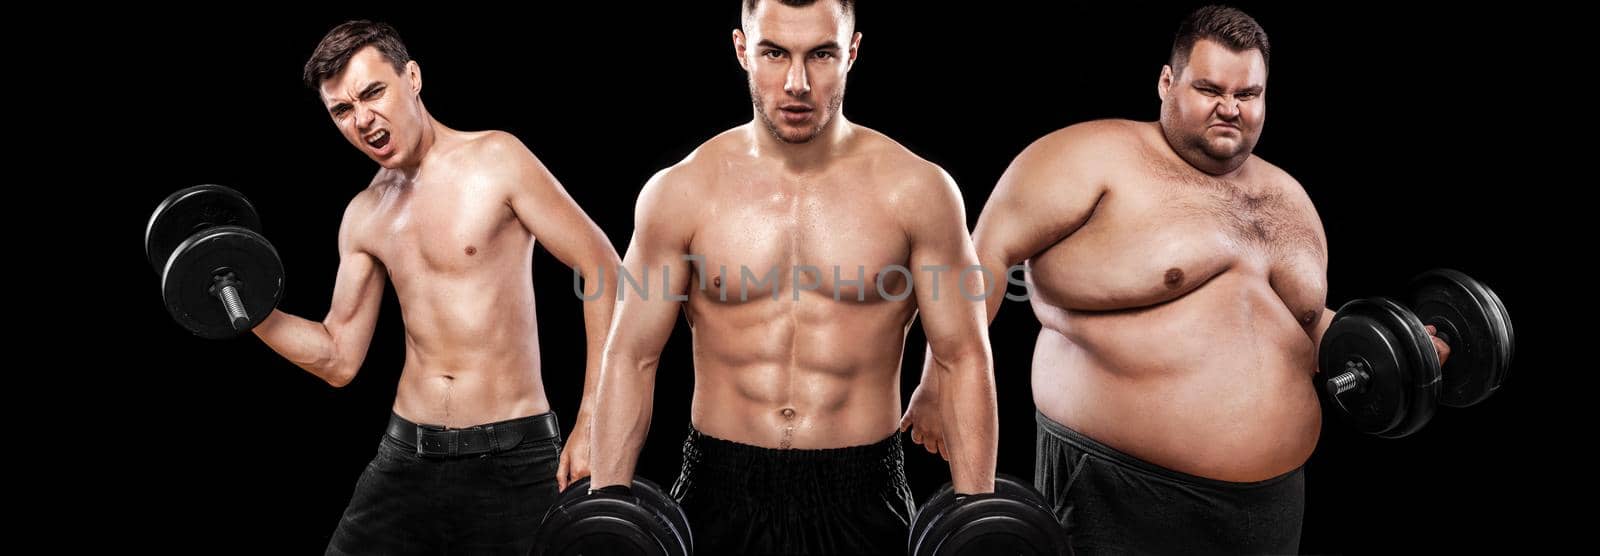 Ectomorph, mesomorph and endomorph . Before and after result. Sport concept. Group of three young sports men - fitness models holds the dumbbell on black background. Fat, fit and athletic men. by MikeOrlov